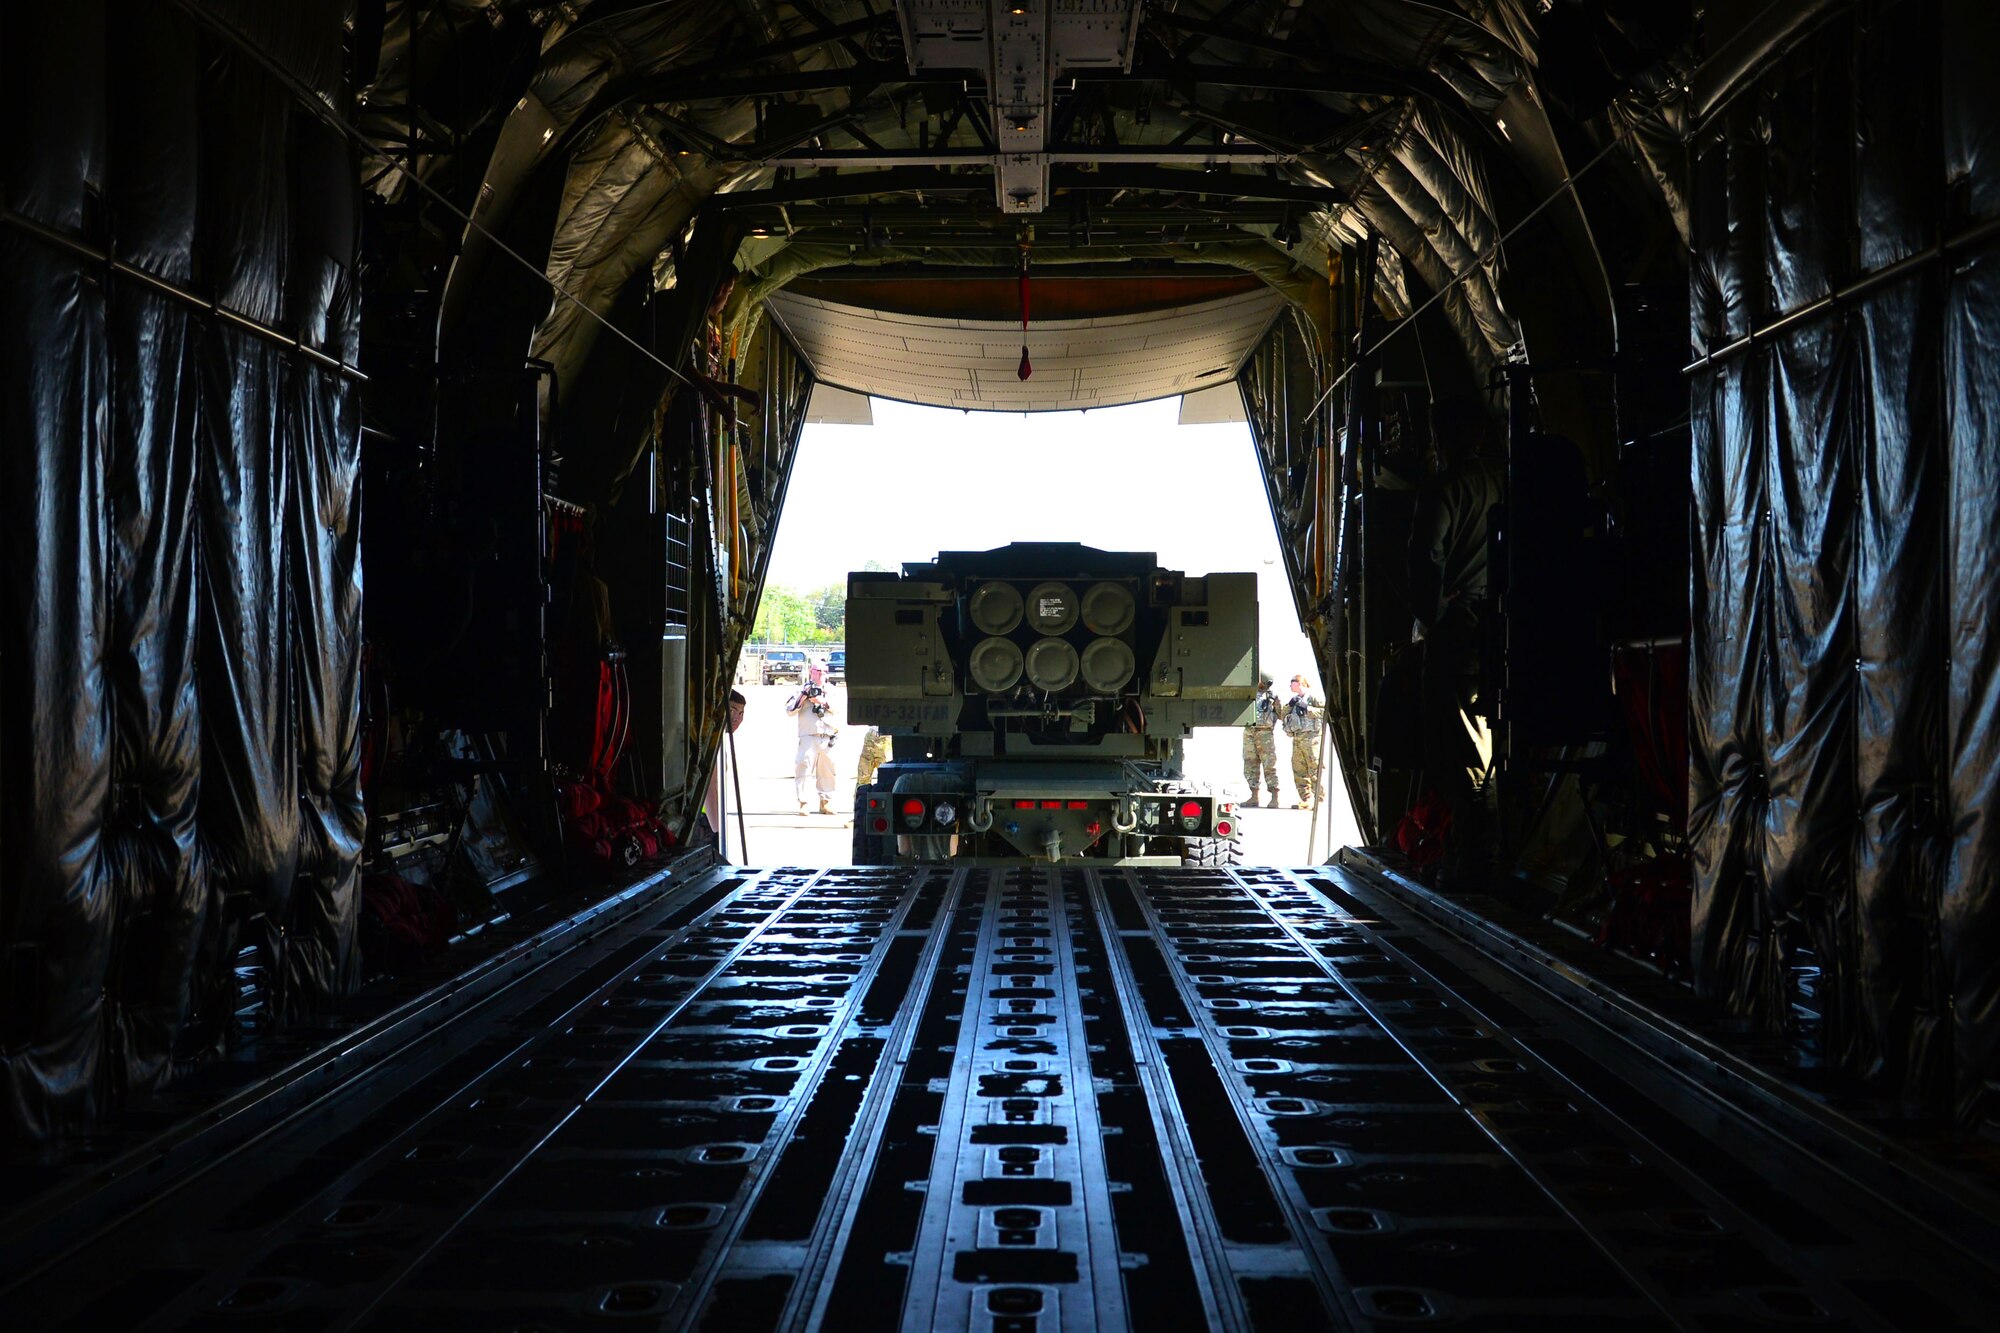 An M142 High Mobility Artillery Rocket System is loaded onto a C130-J during Green Flag Little Rock April 10, 2018, near Alexandria, La. The HIMARS carries six rockets and can launch the entire multiple launch rocket system family of munitions. (U.S. Air Force Photo by Airman 1st Class Codie Collins)